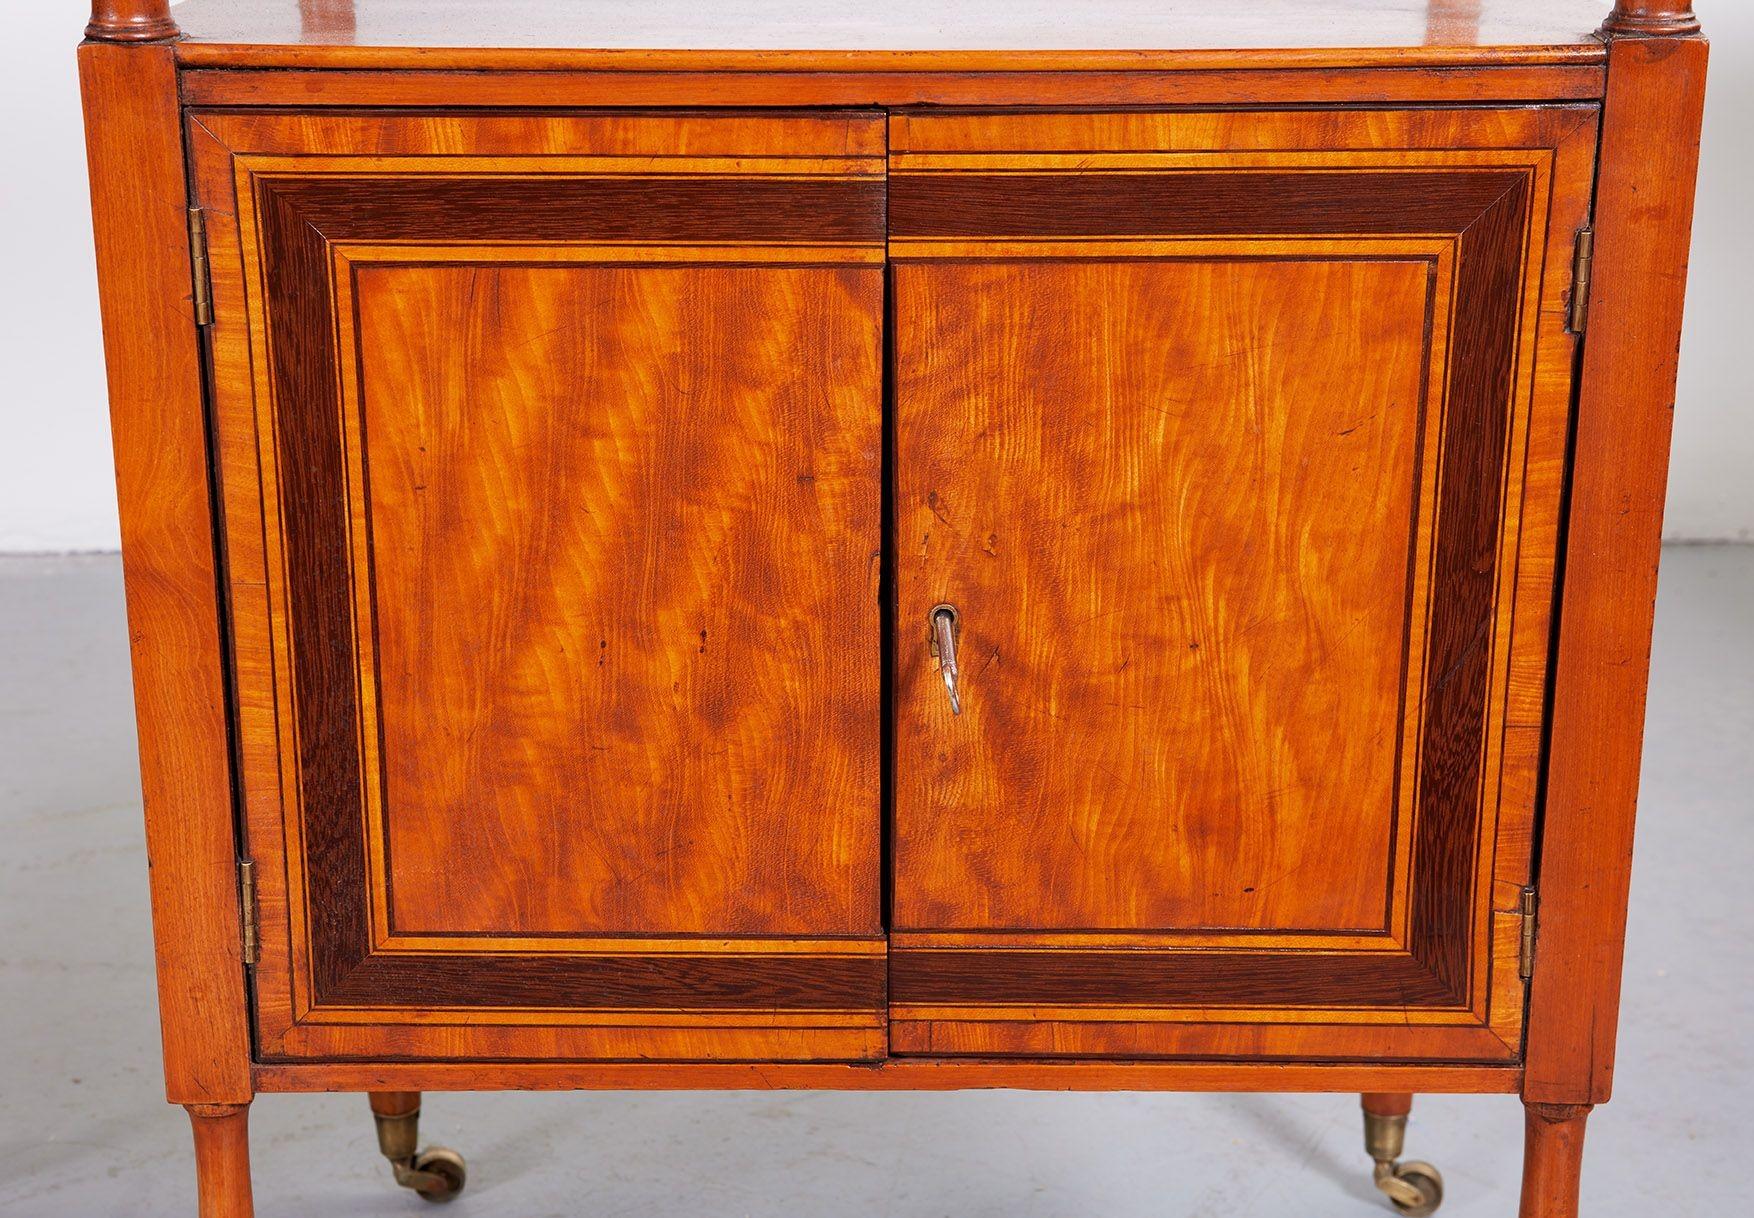 A Rare Pair of 18th c. English Satinwood Etageres For Sale 3